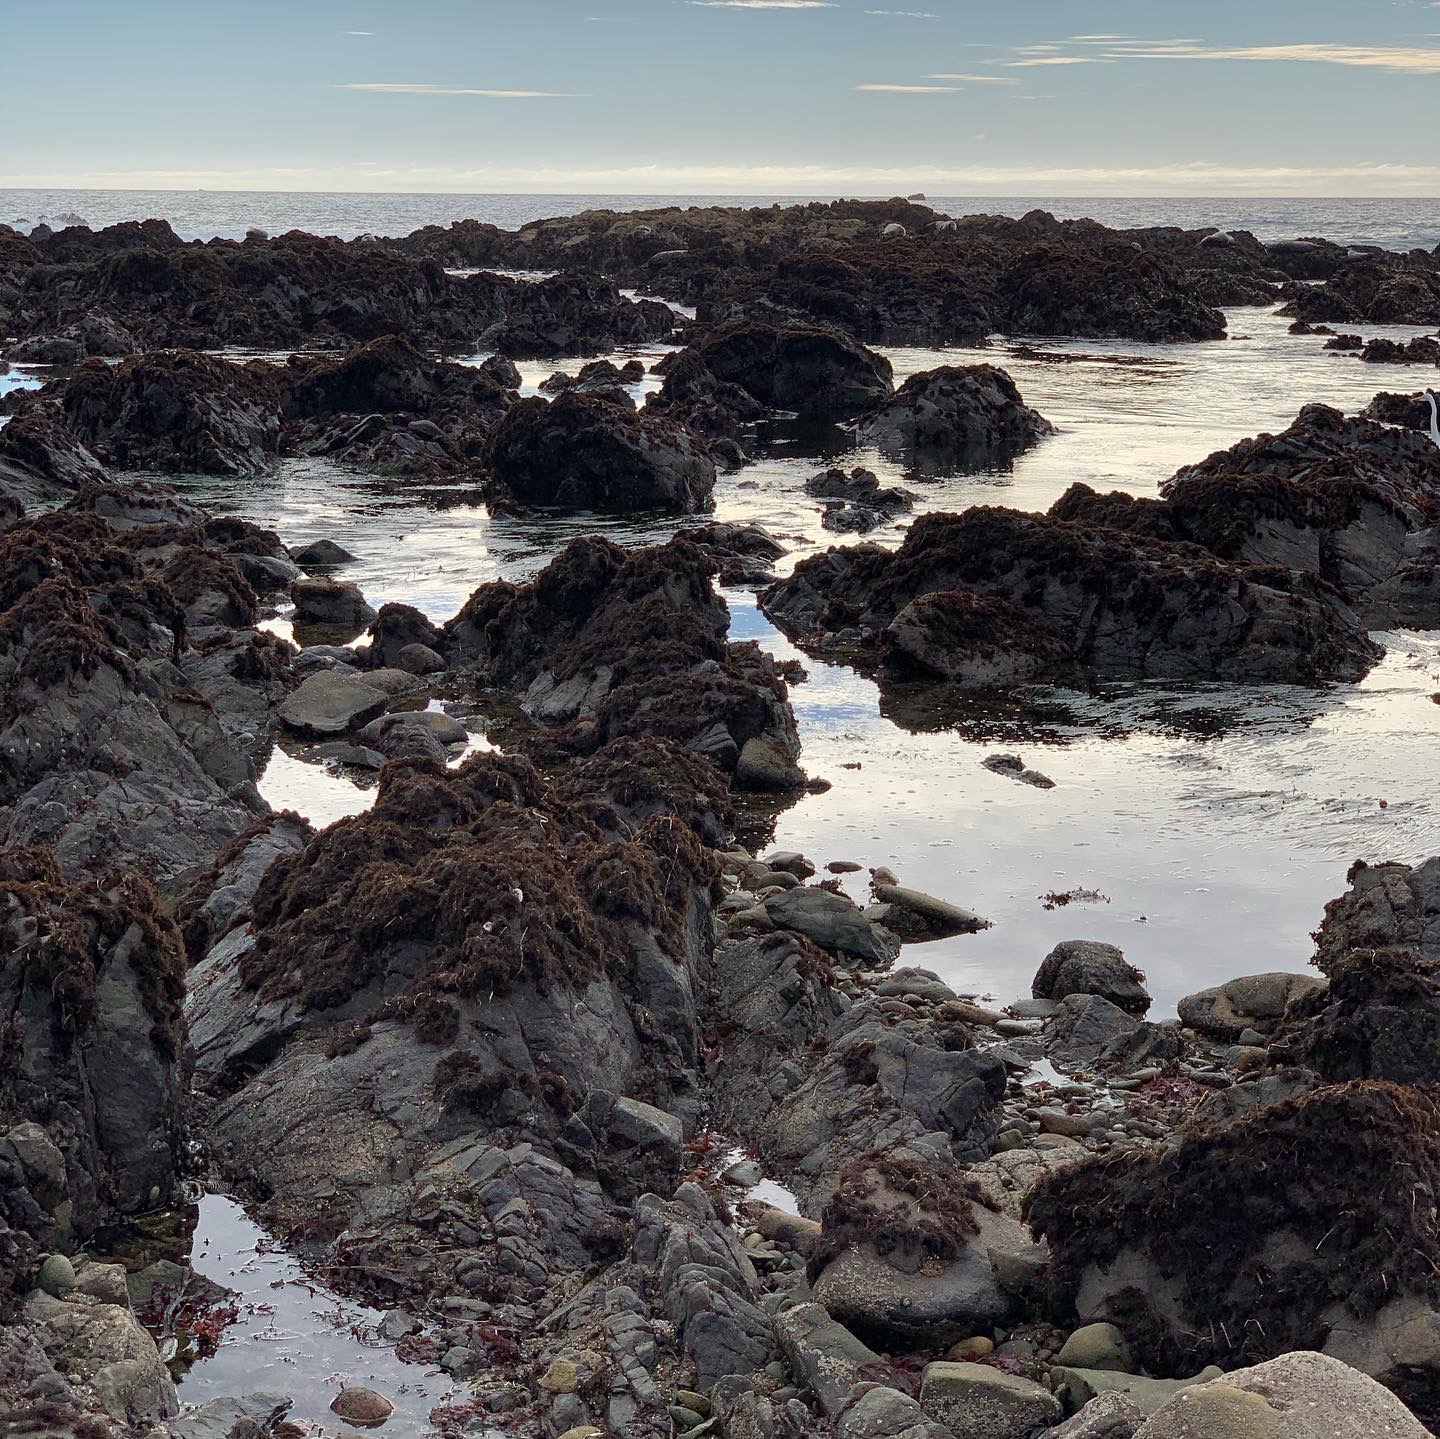 tidepools covered in kelp and barnacles at low tide in Central California coast